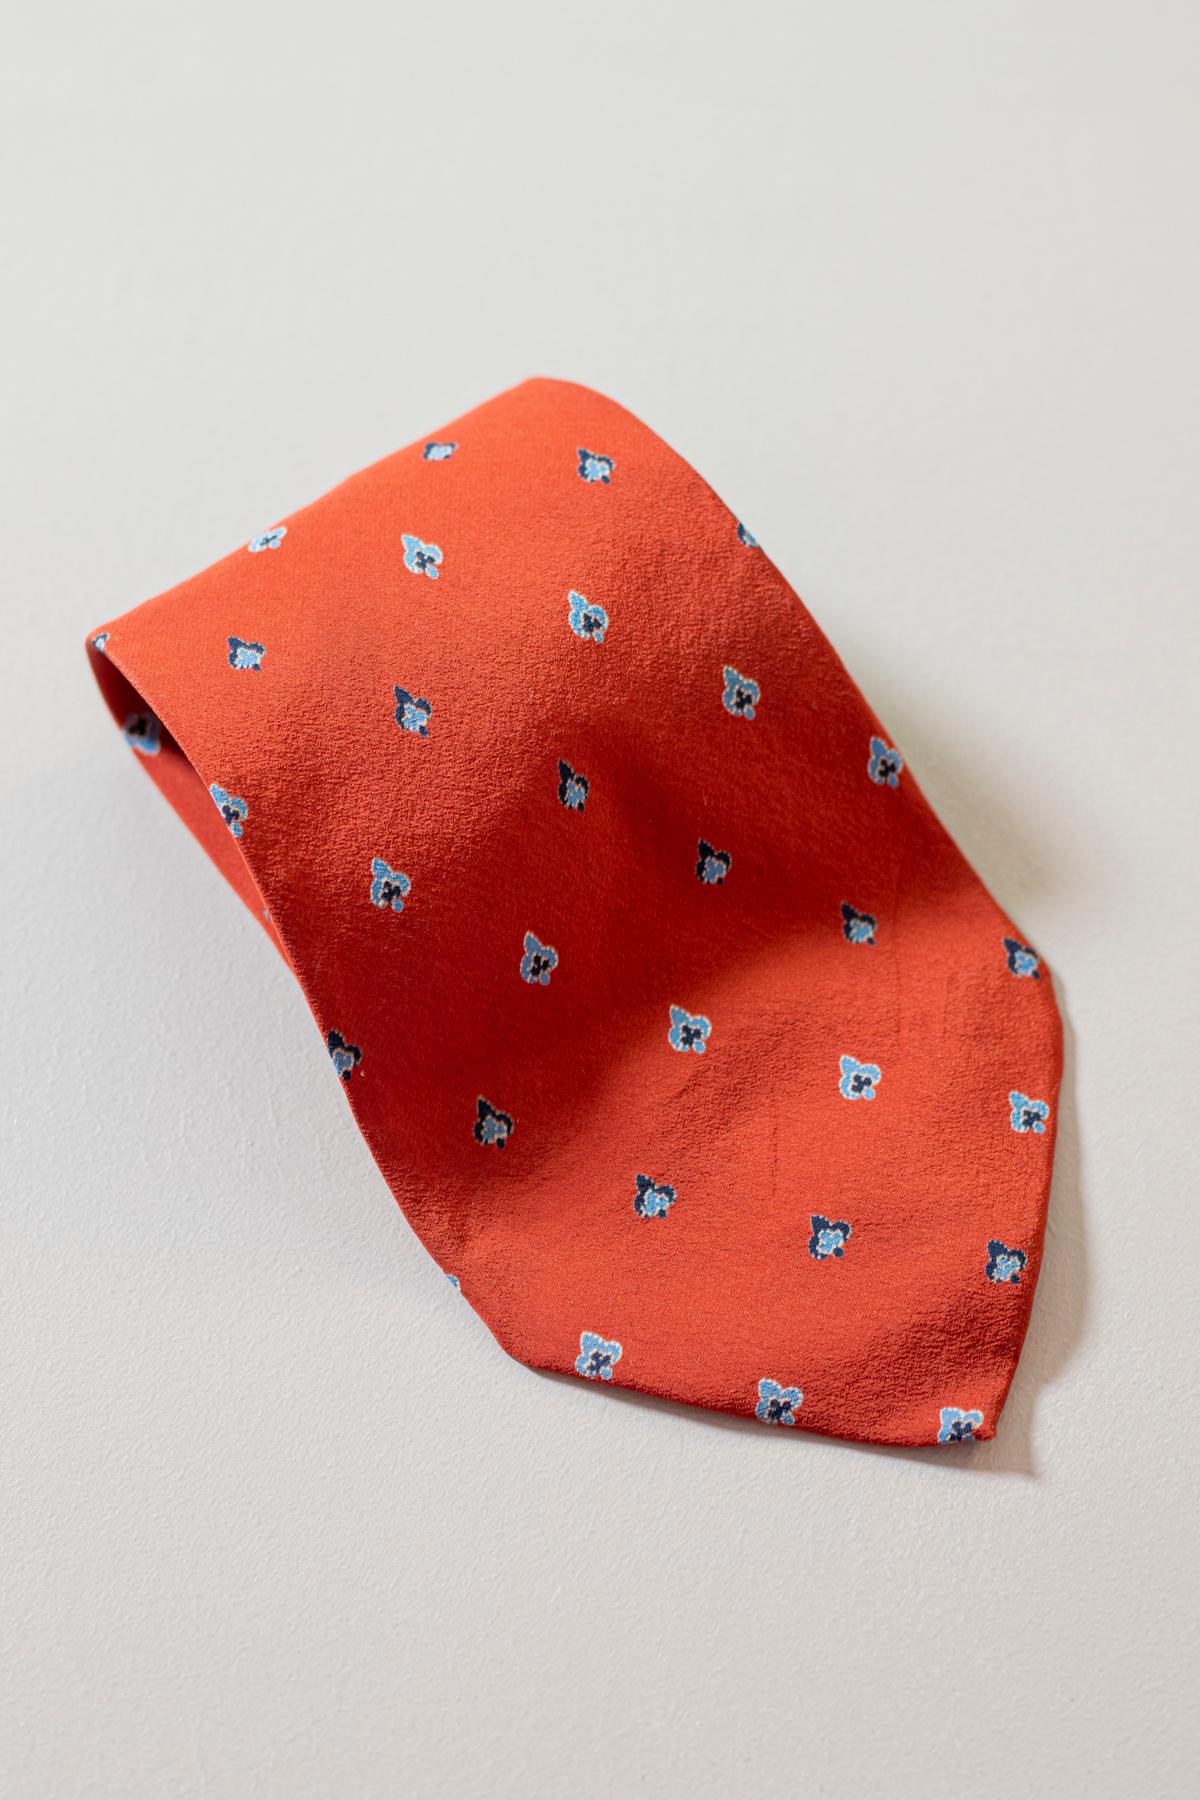 Elegant and vintage this tie is designed by C. Bardelli, it is made of silk. Decorated with small blue lily symbols on a red background. With its inimitable character and colors, this tie, thanks to its elegance, is able to give you an impeccable